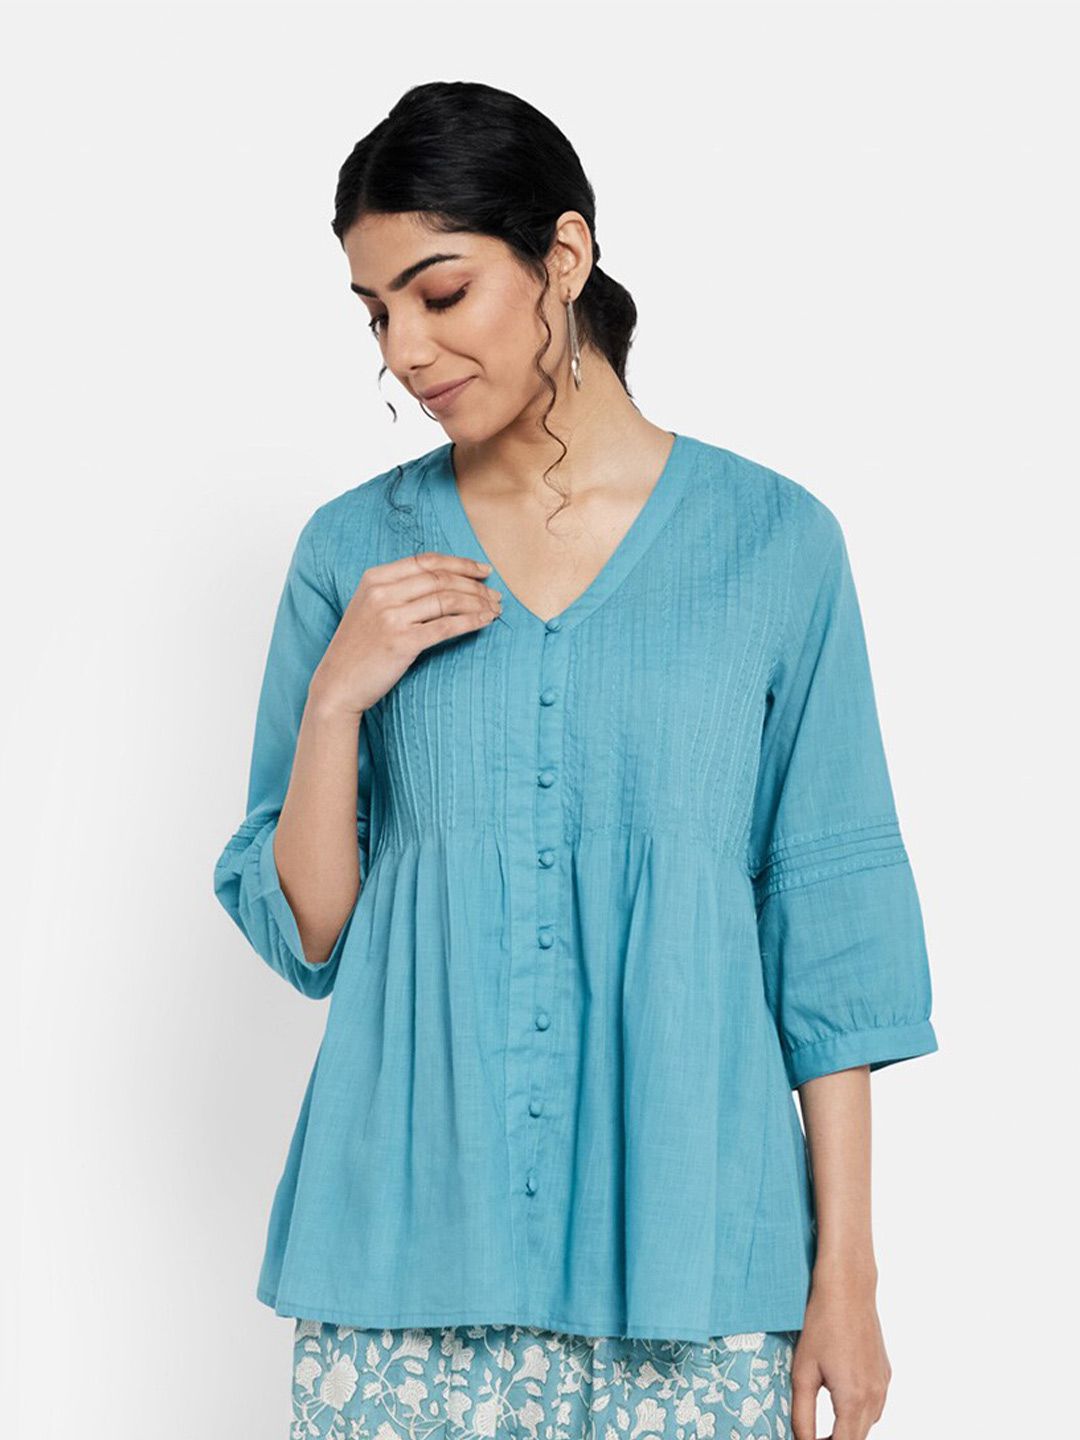 Fabindia Blue Solid Cotton A-Line Top Price in India